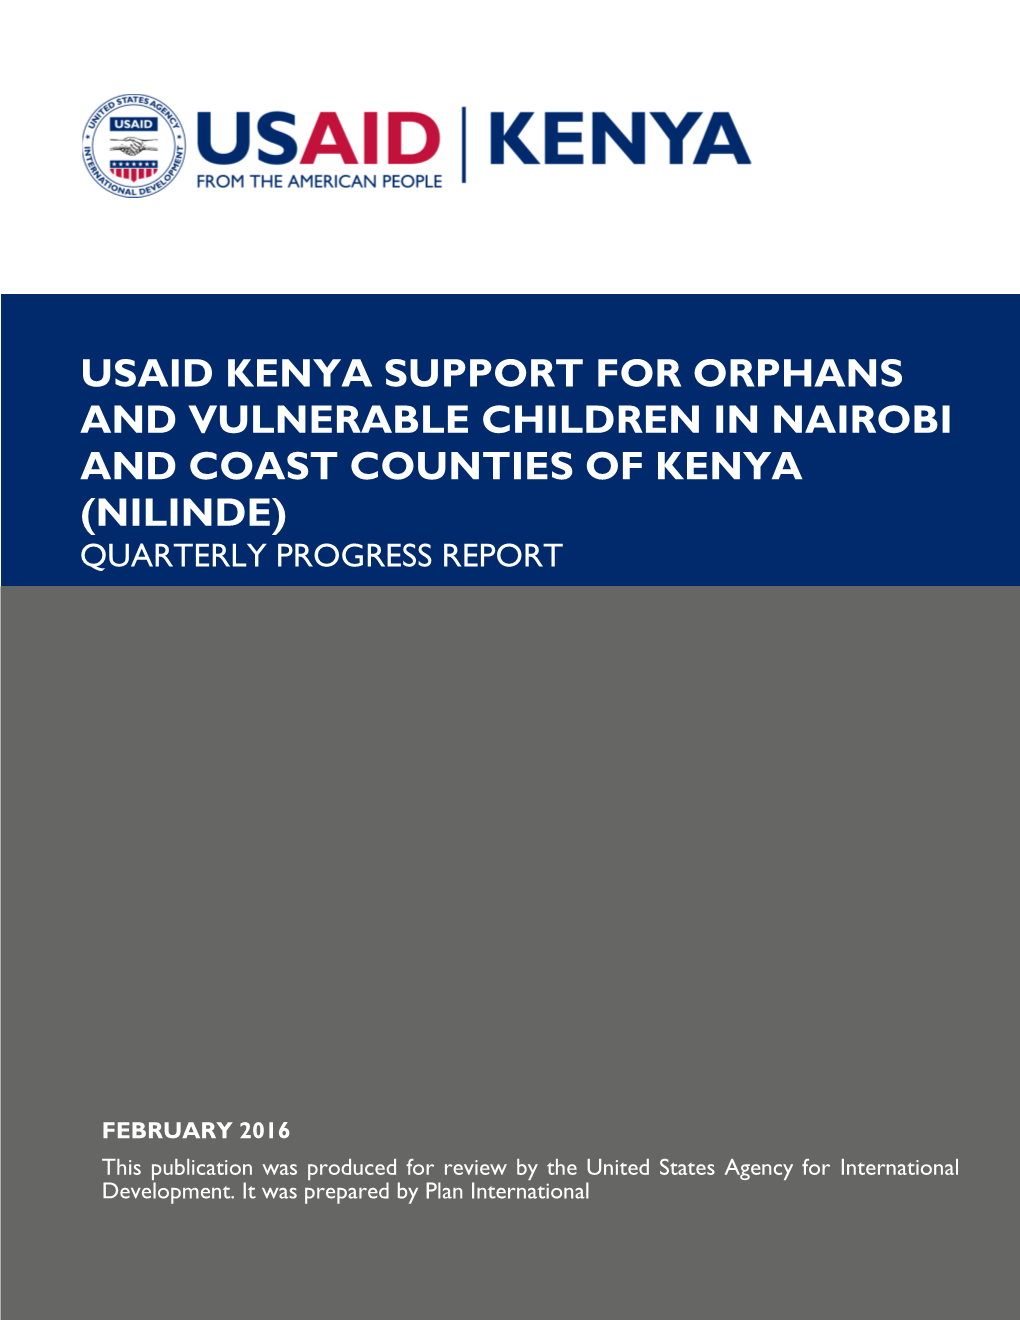 Usaid Kenya Support for Orphans and Vulnerable Children in Nairobi and Coast Counties of Kenya (Nilinde) Quarterly Progress Report